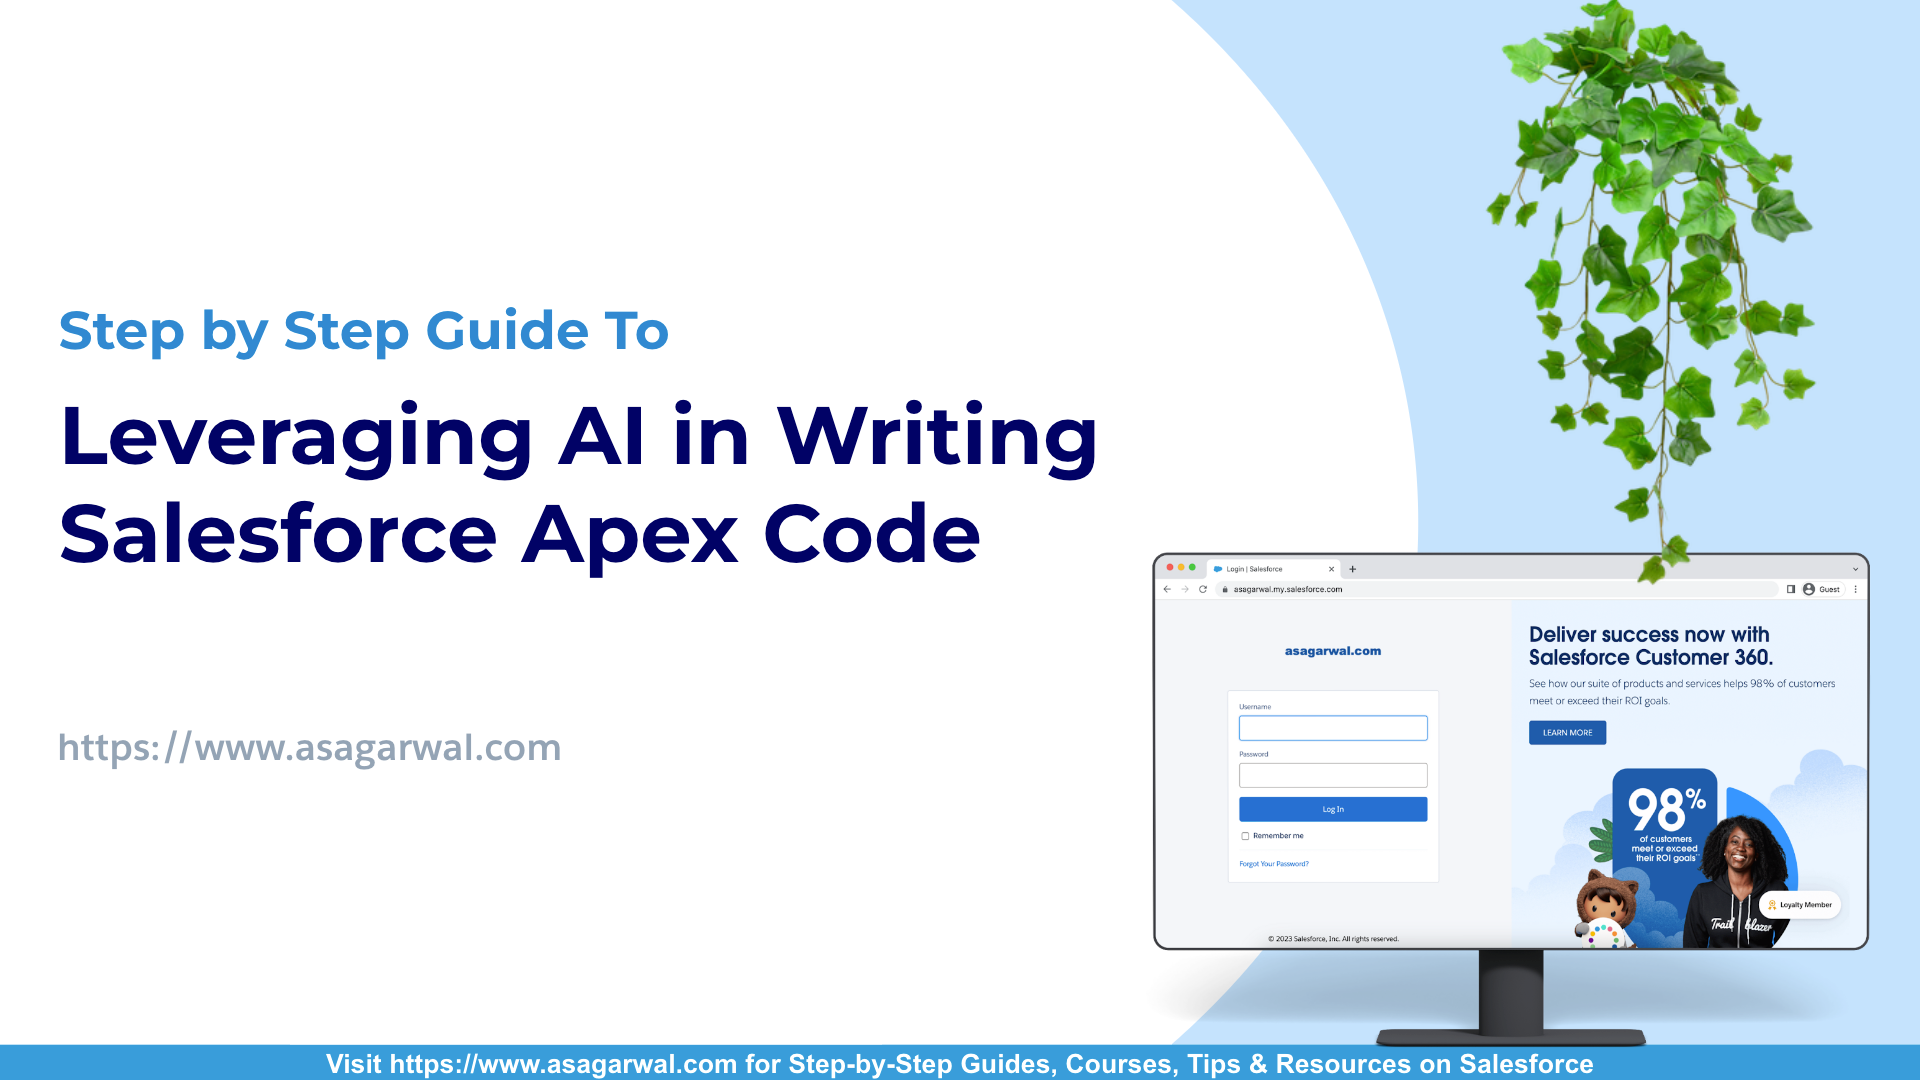 Step by Step Guide to Leveraging AI in Writing Salesforce Apex Code